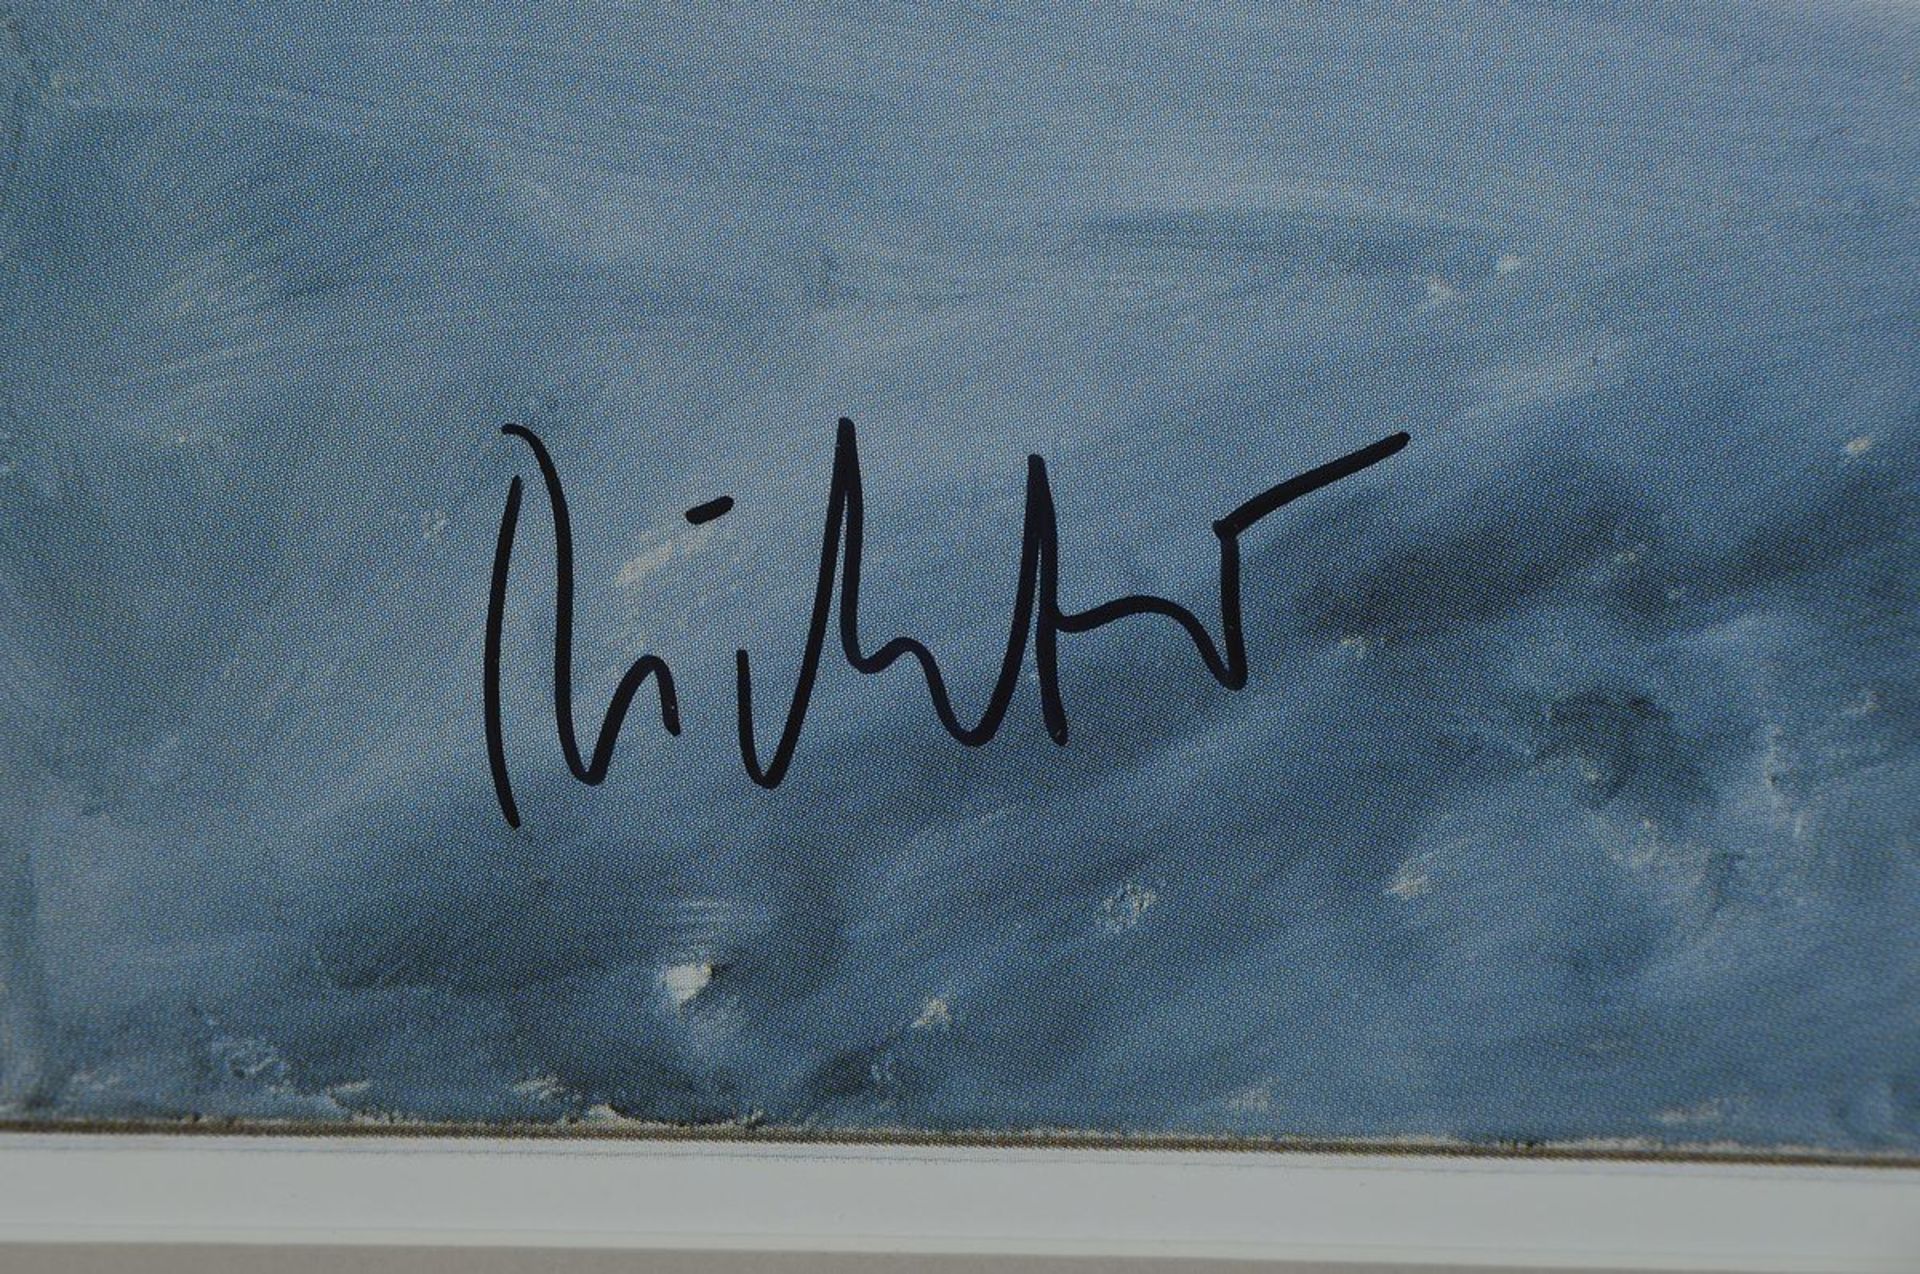 Gerhard Richter, born 1932, offset on paper, signed by hand, only a few signed by hand, 84 x 59.5 - Bild 2 aus 4